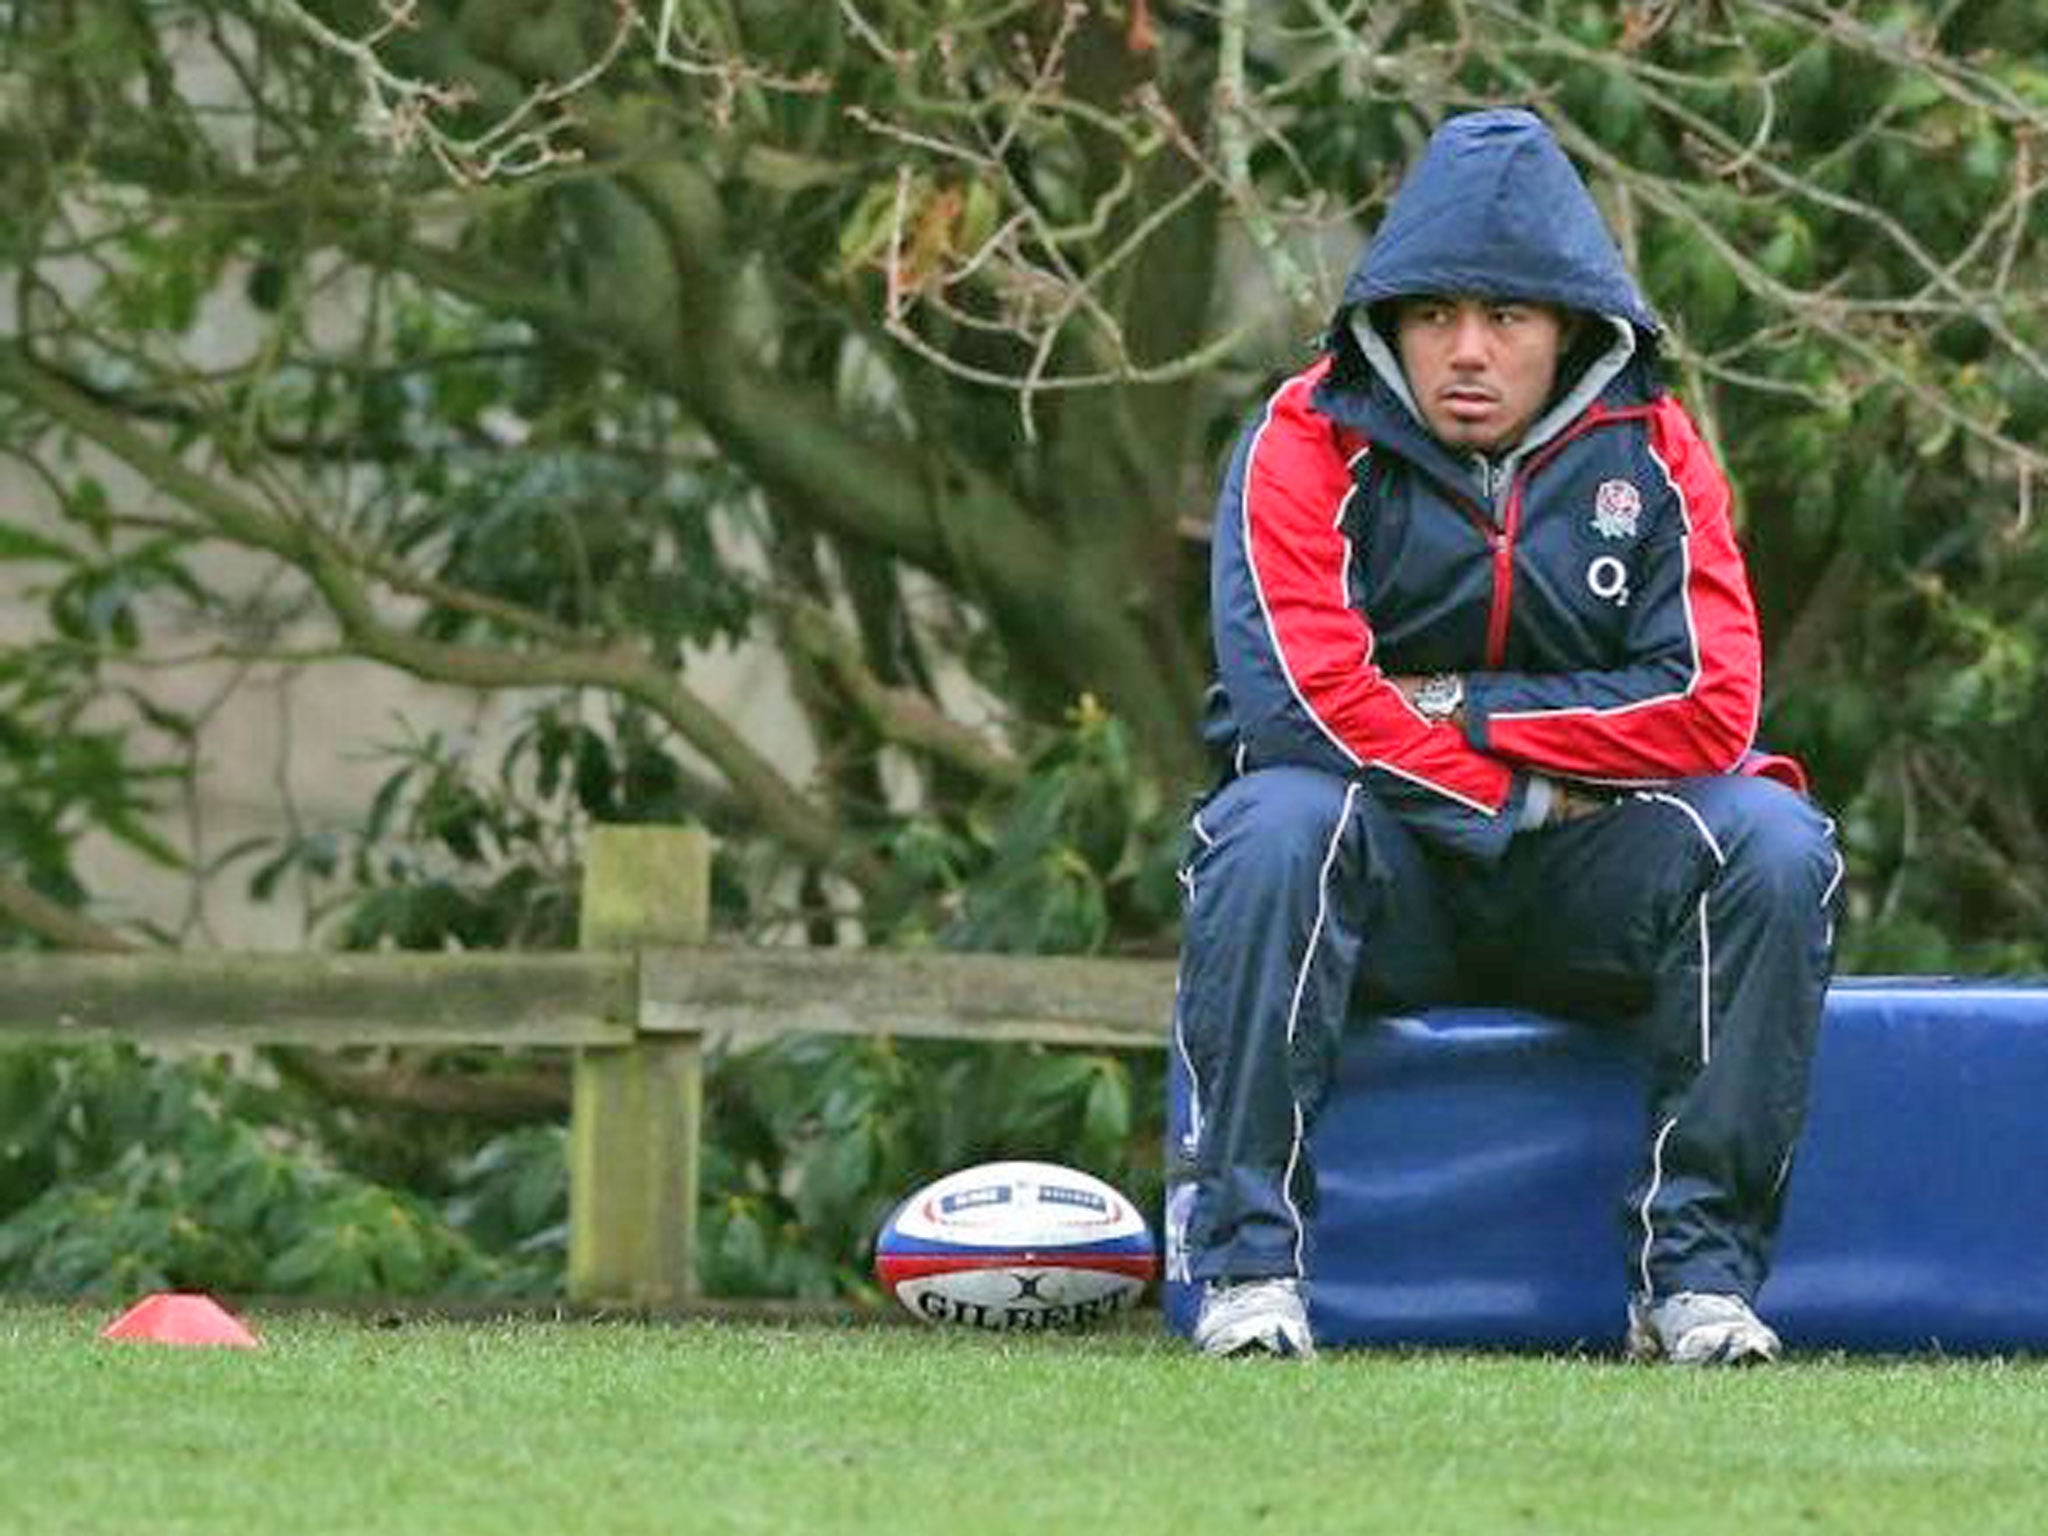 Manu Tuilagi watches England training from the sidelines